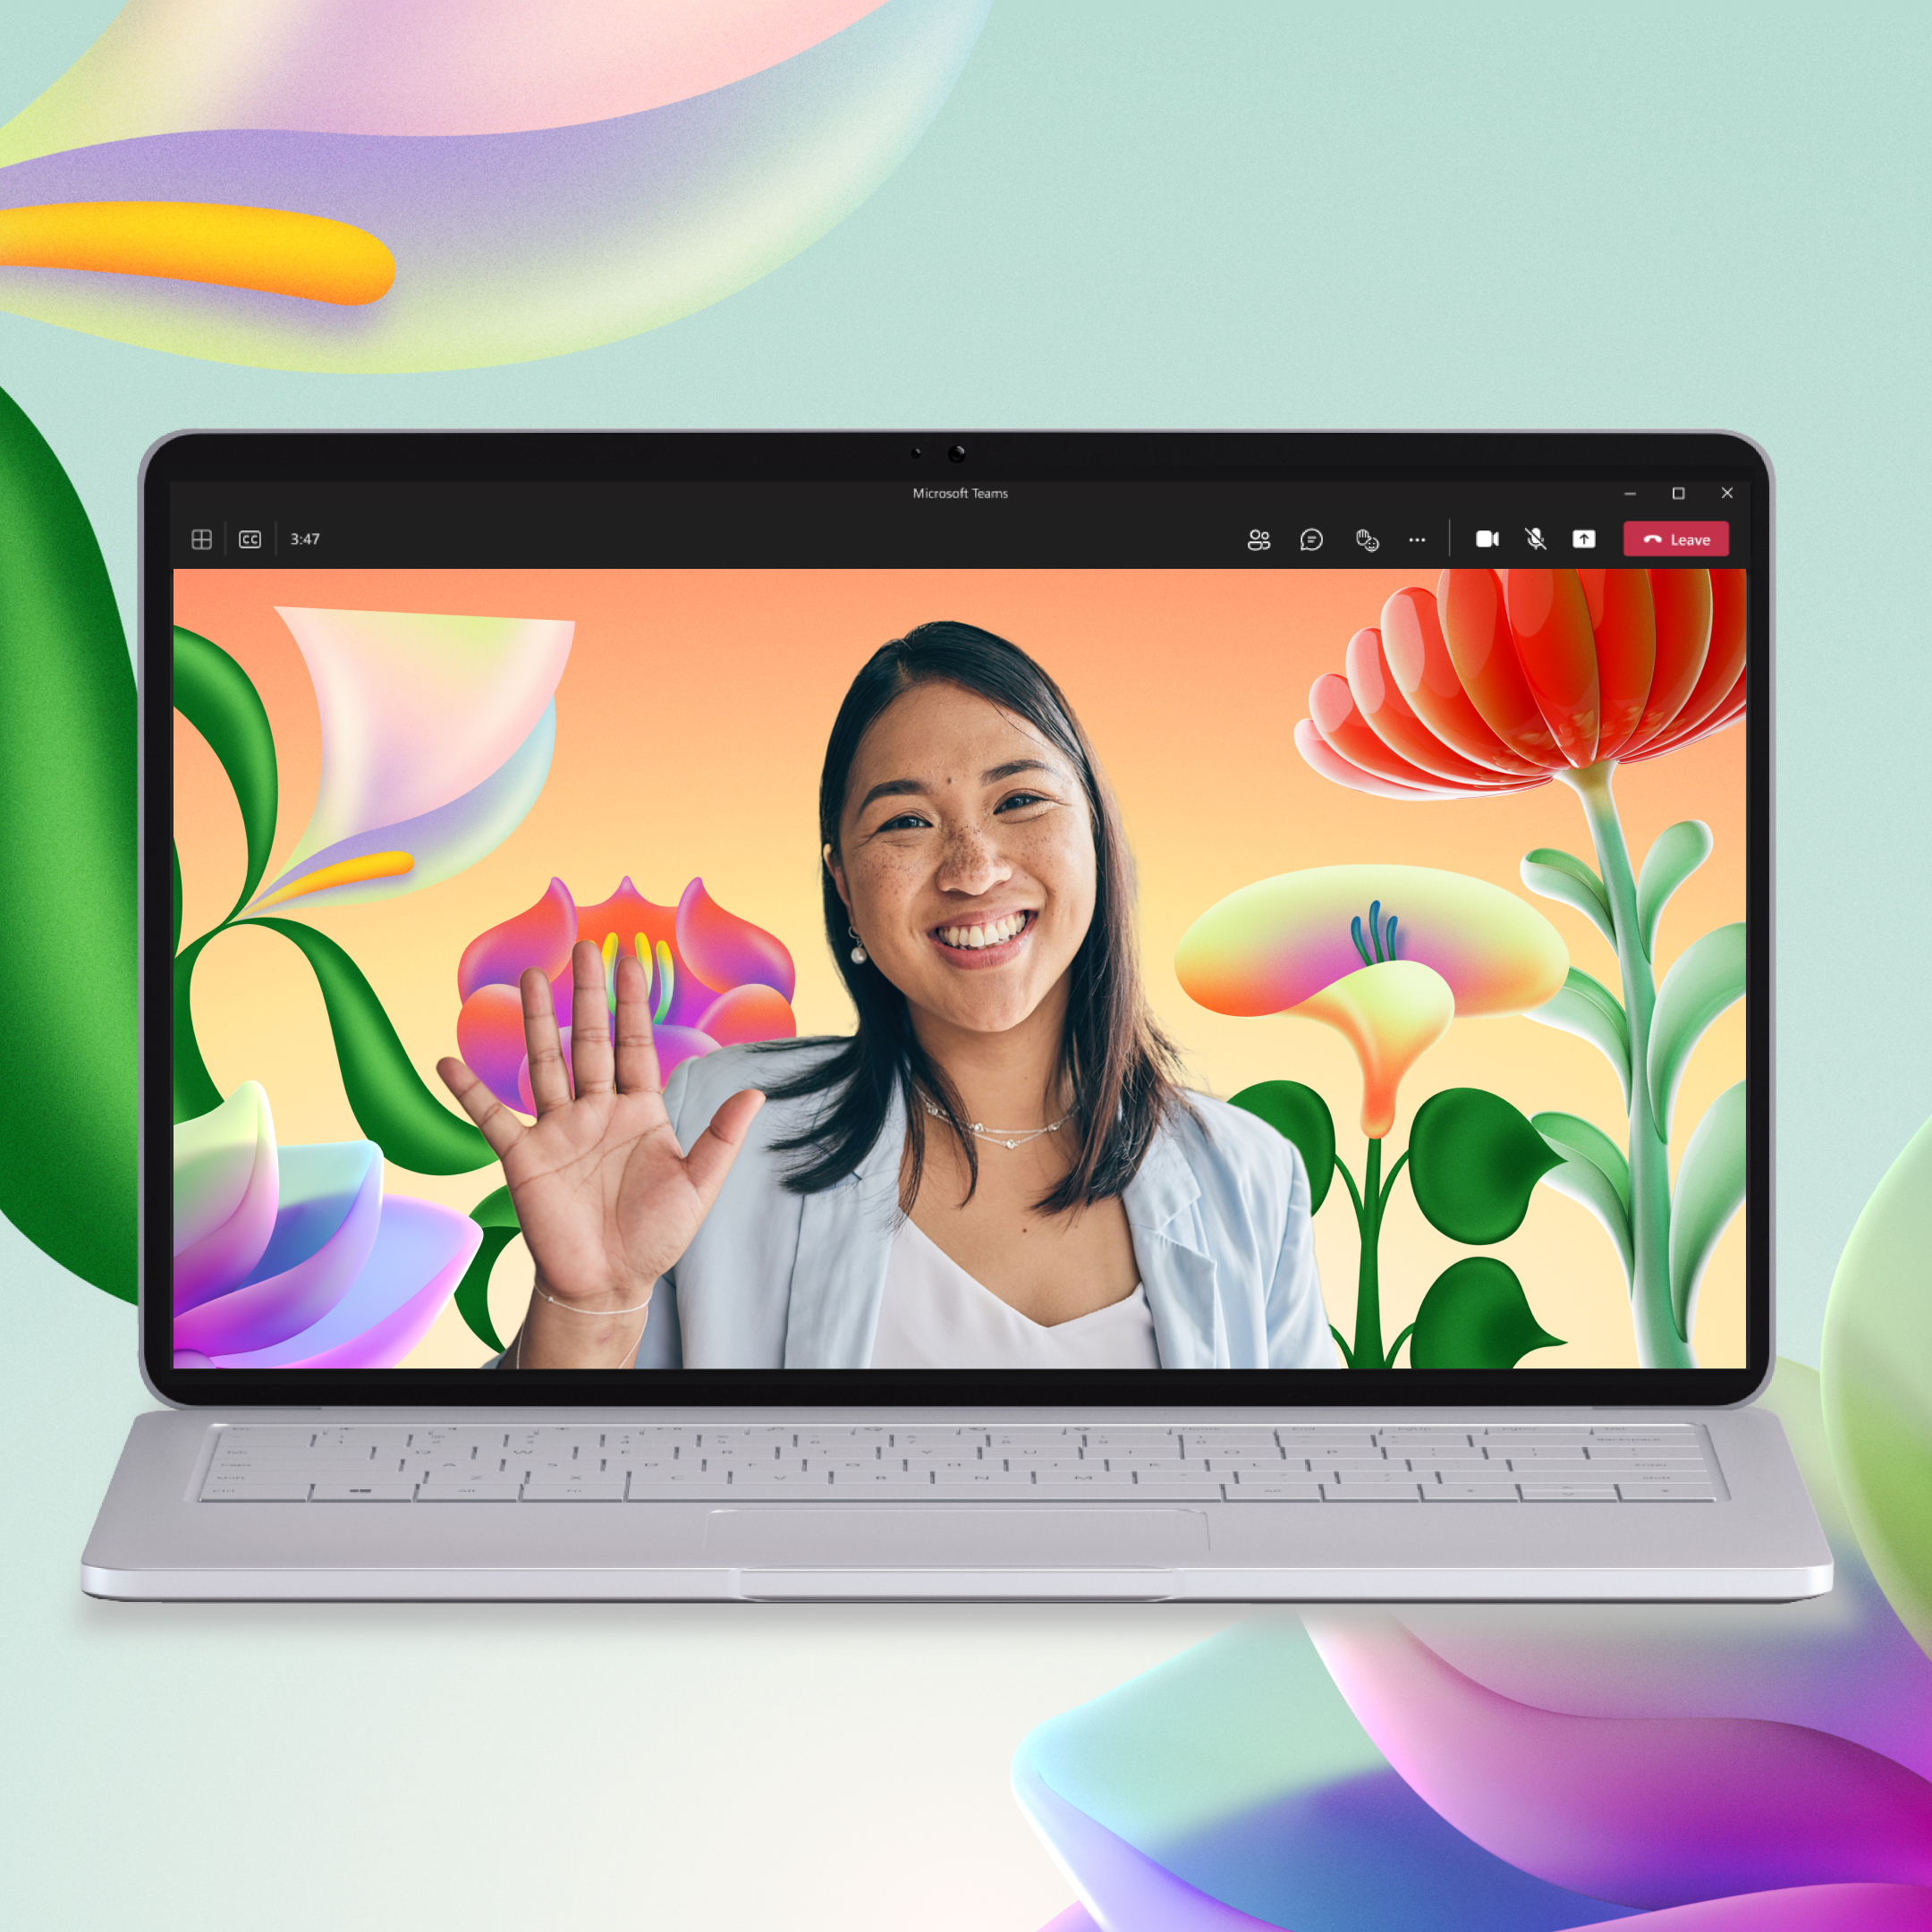 A woman smiles and waves from a laptop screen with a colorful floral background.